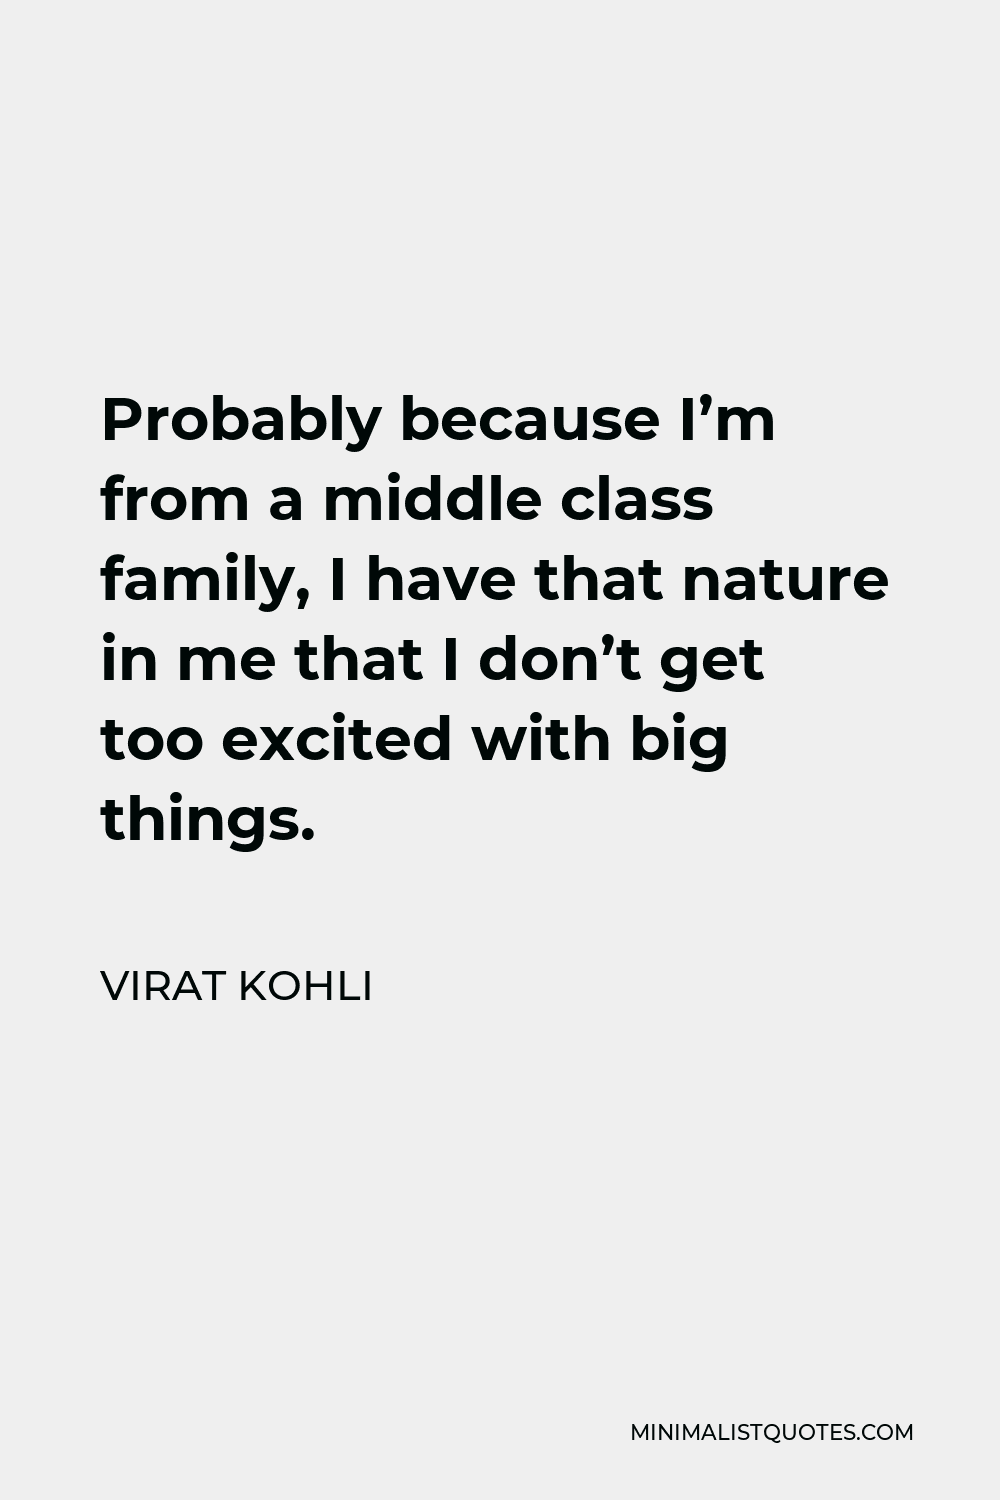 Virat Kohli Quote - Probably because I’m from a middle class family, I have that nature in me that I don’t get too excited with big things.